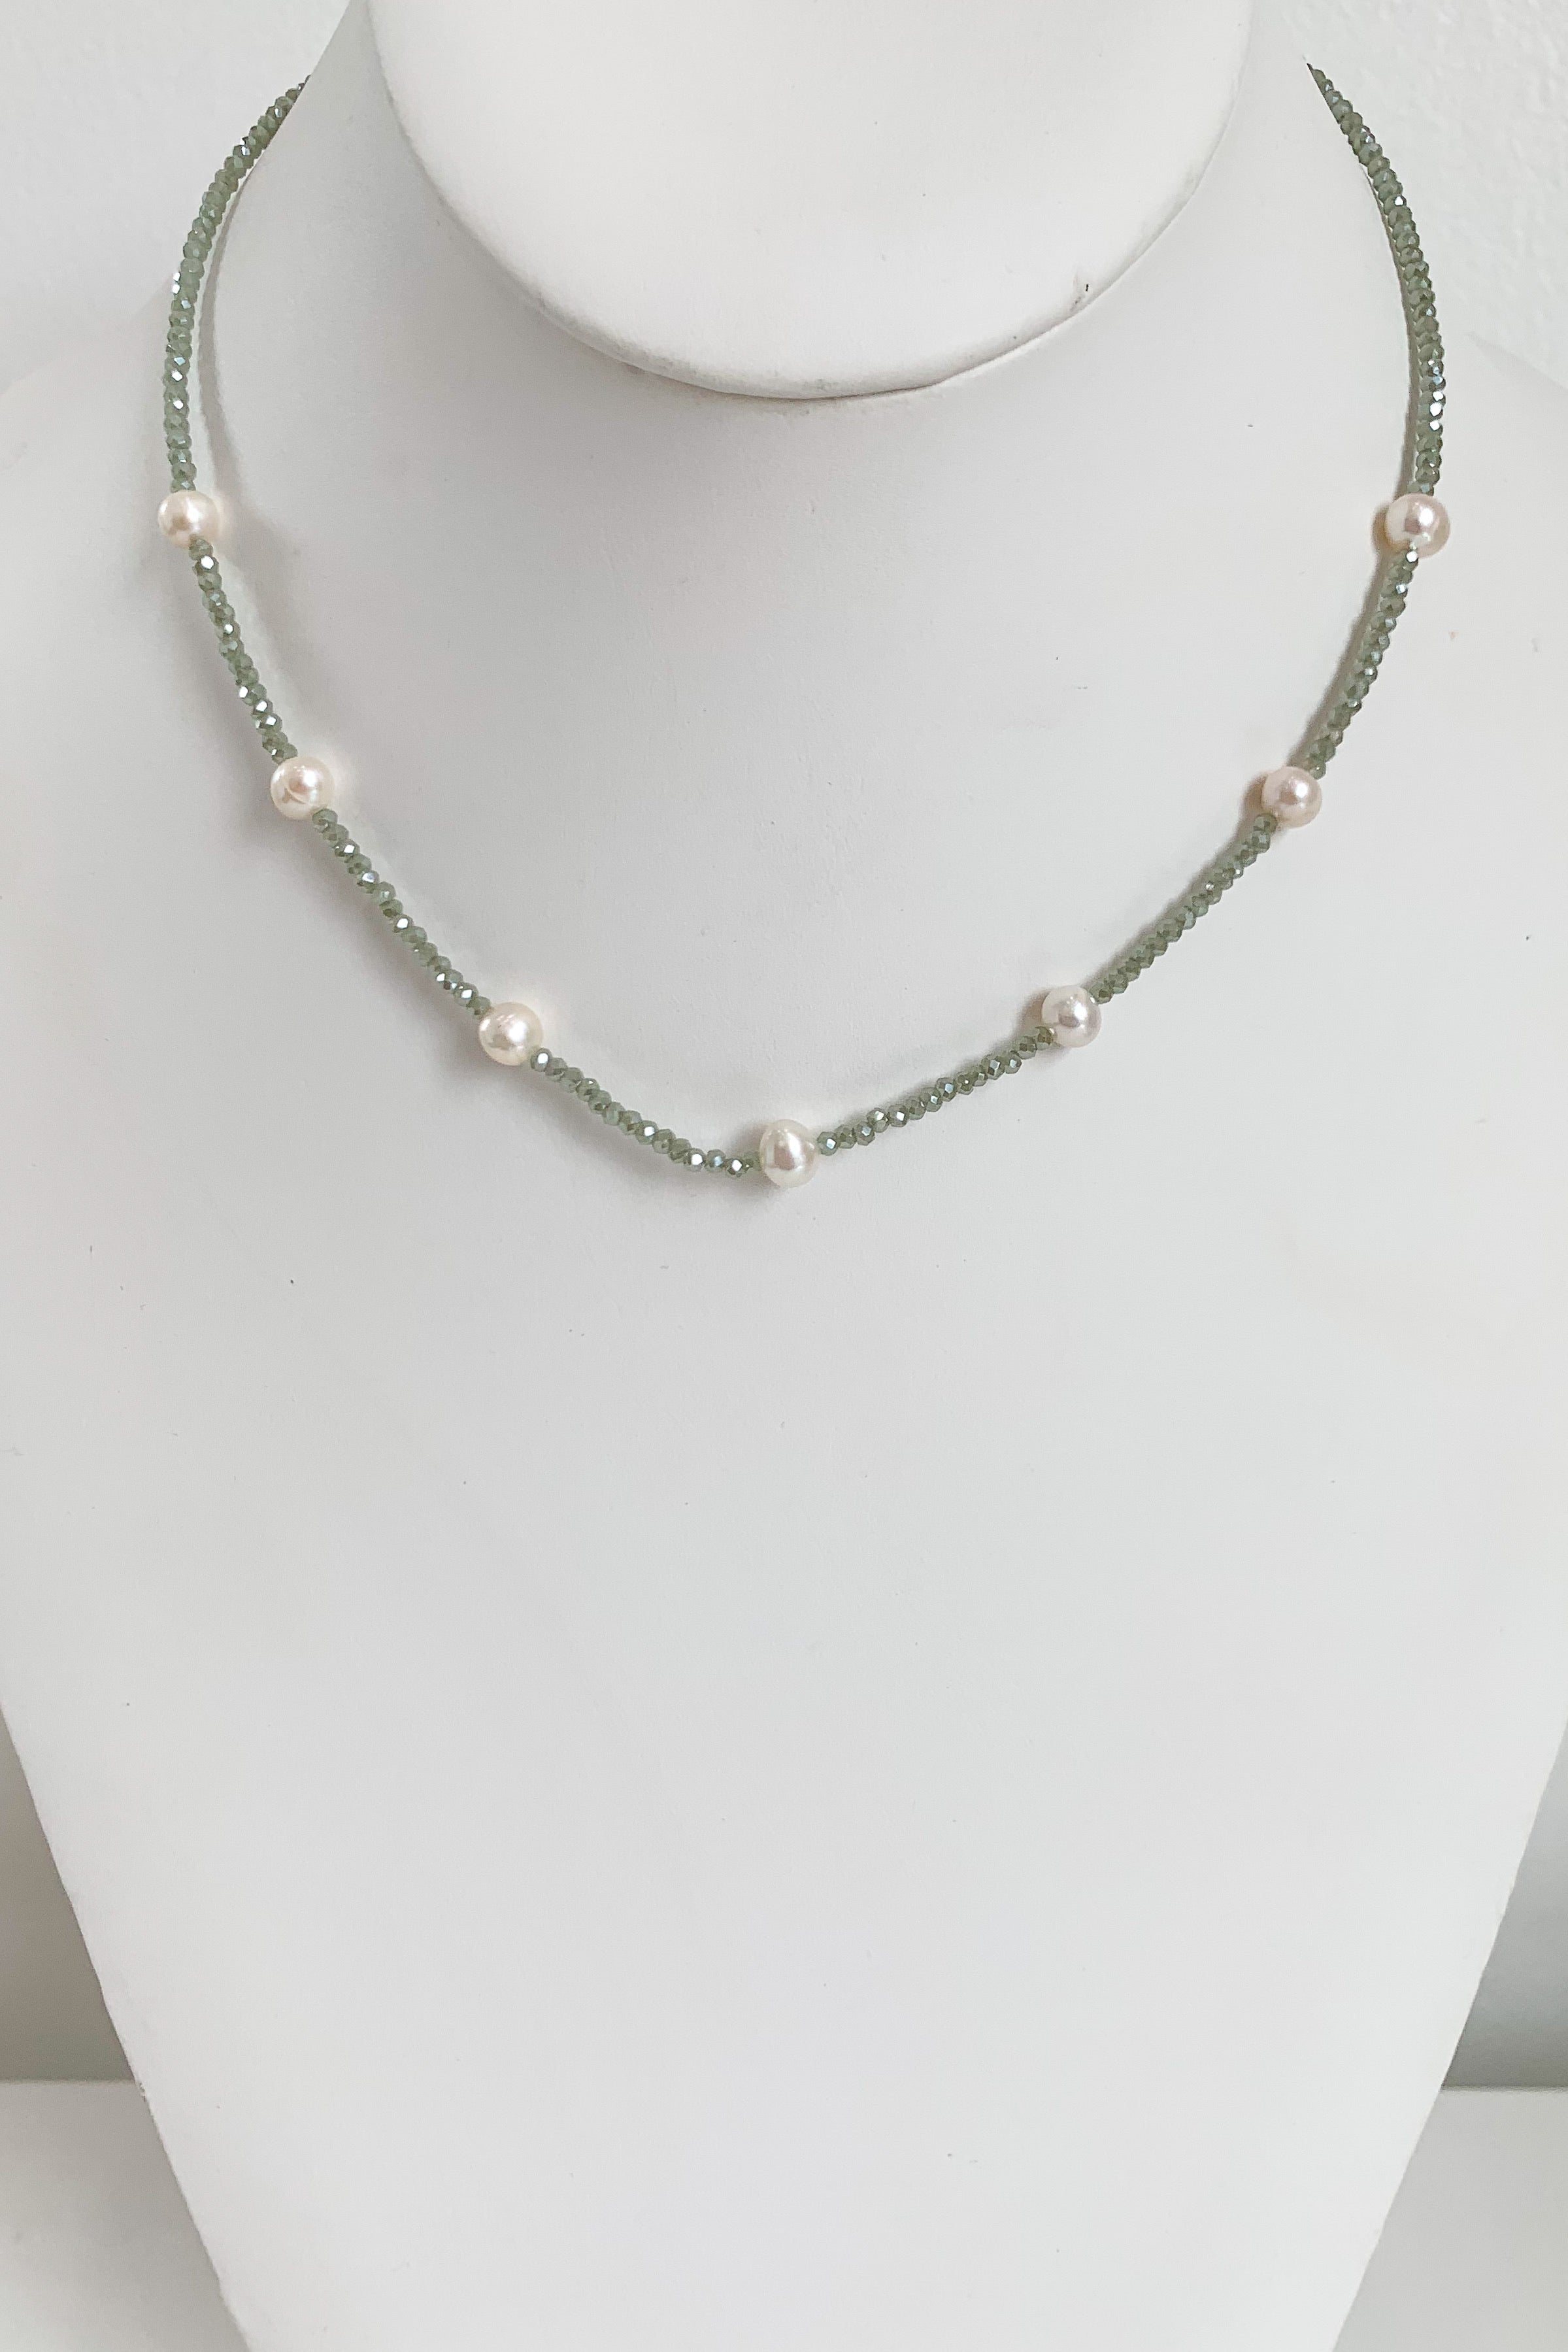 Boho String of Pearls Necklace-Sage